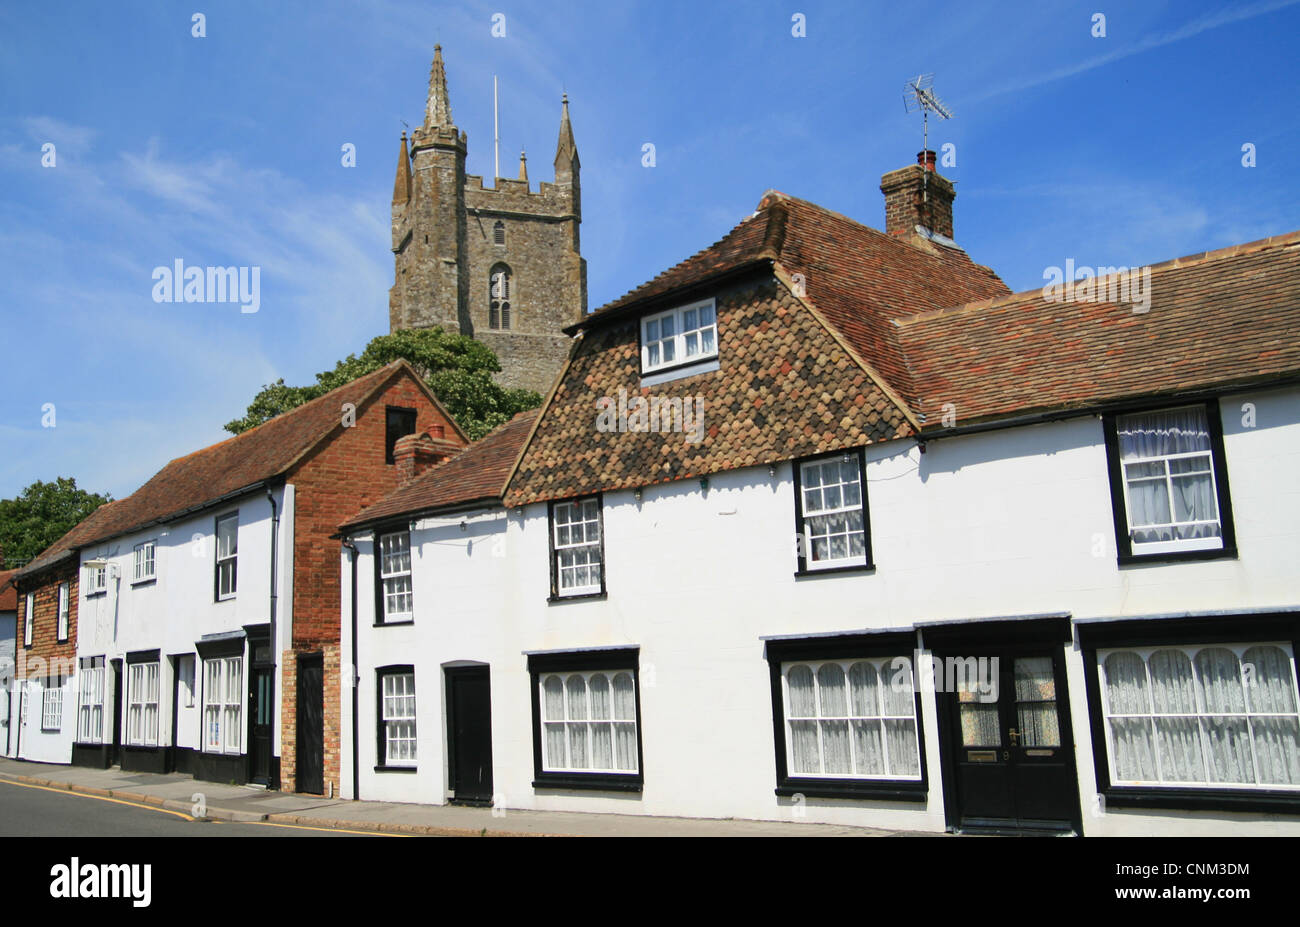 village and All Saints church Lydd Kent England UK Stock Photo